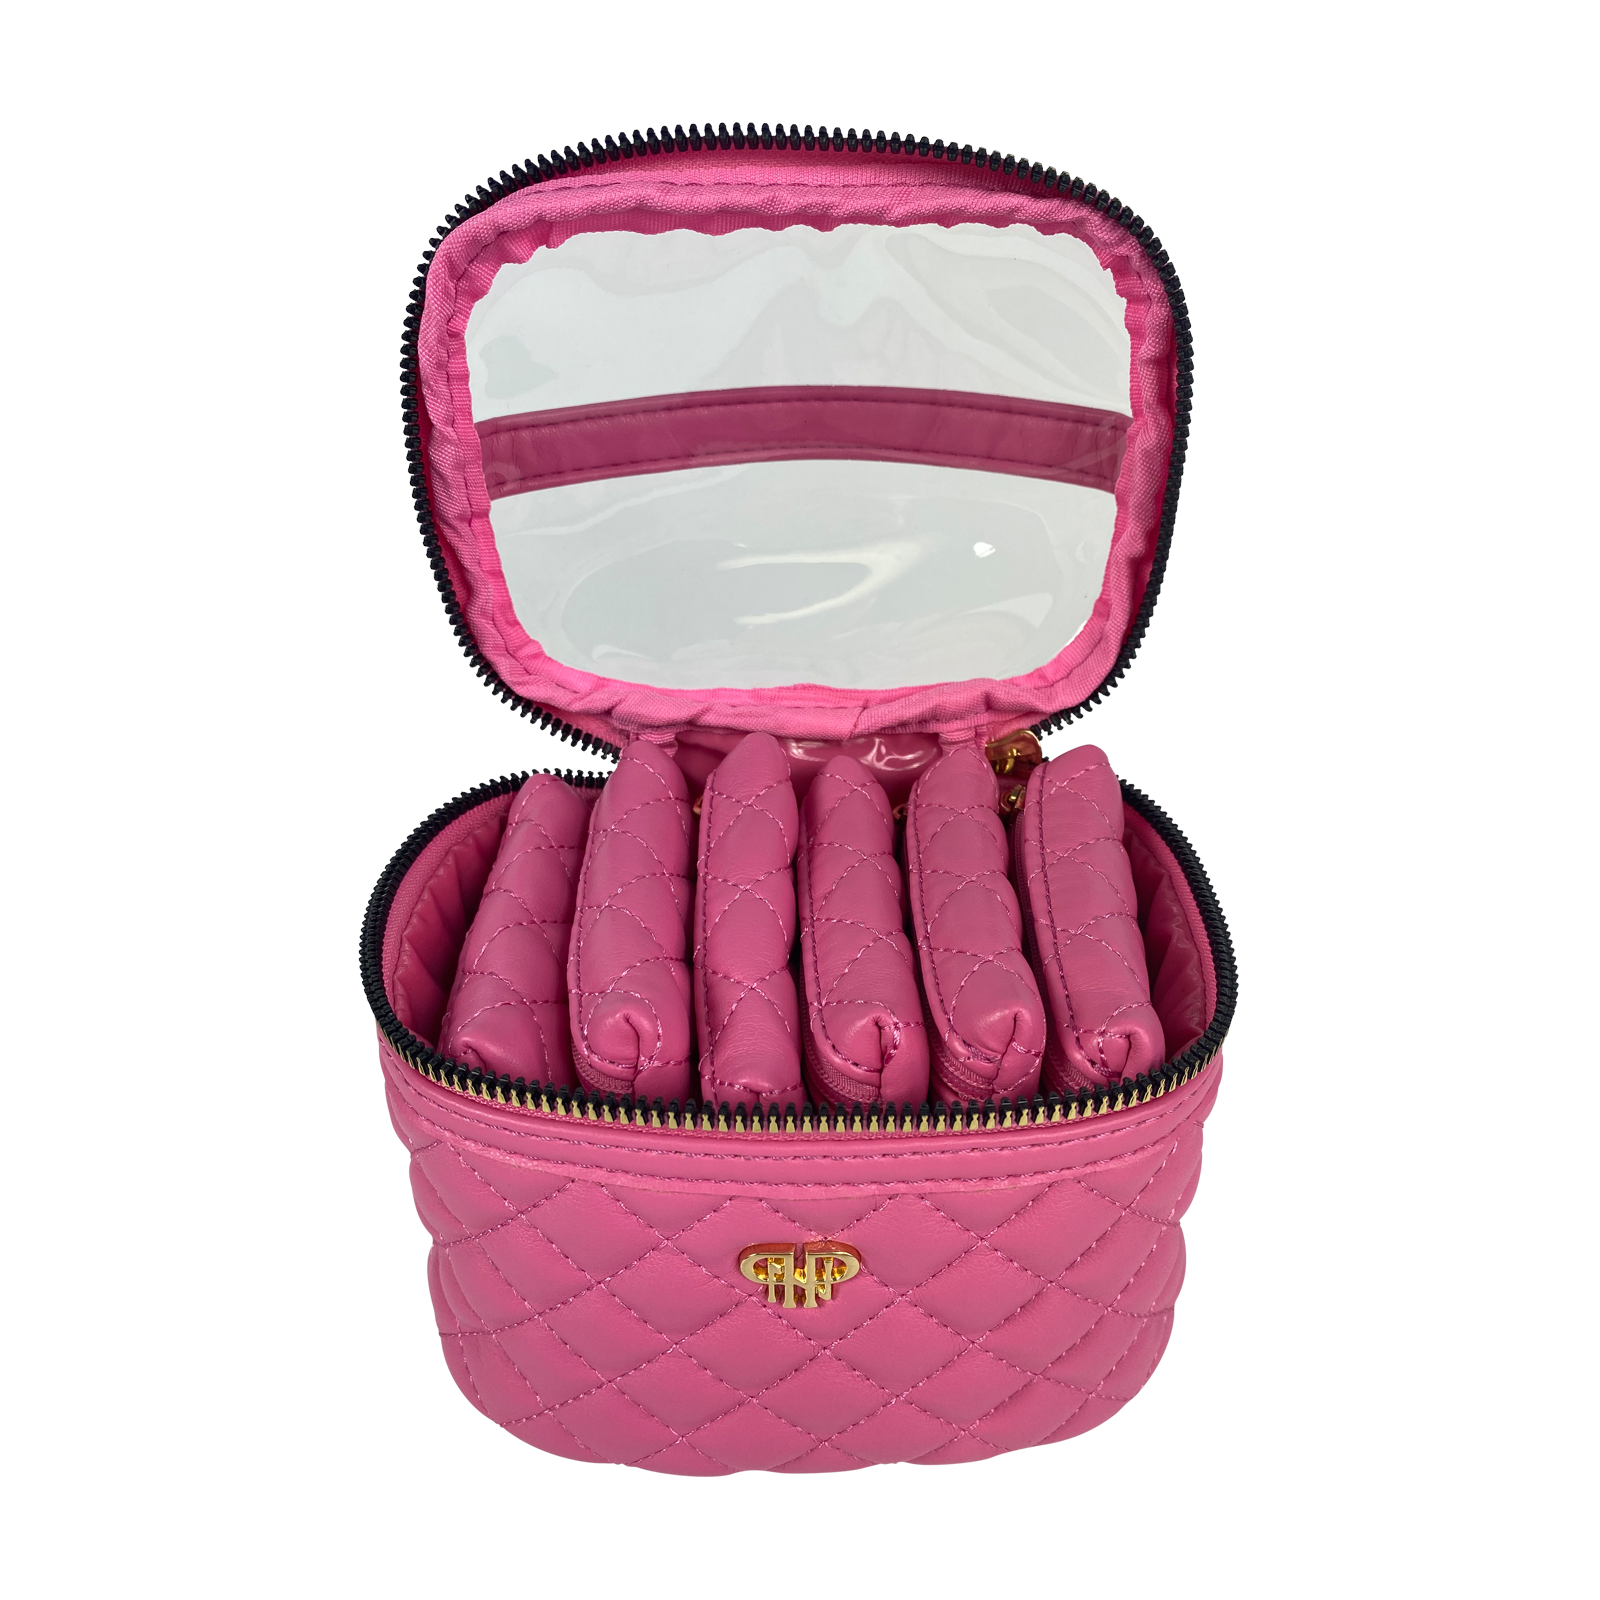 Barbie Pink Travel Jewelry Case with 6 Removable Pouches